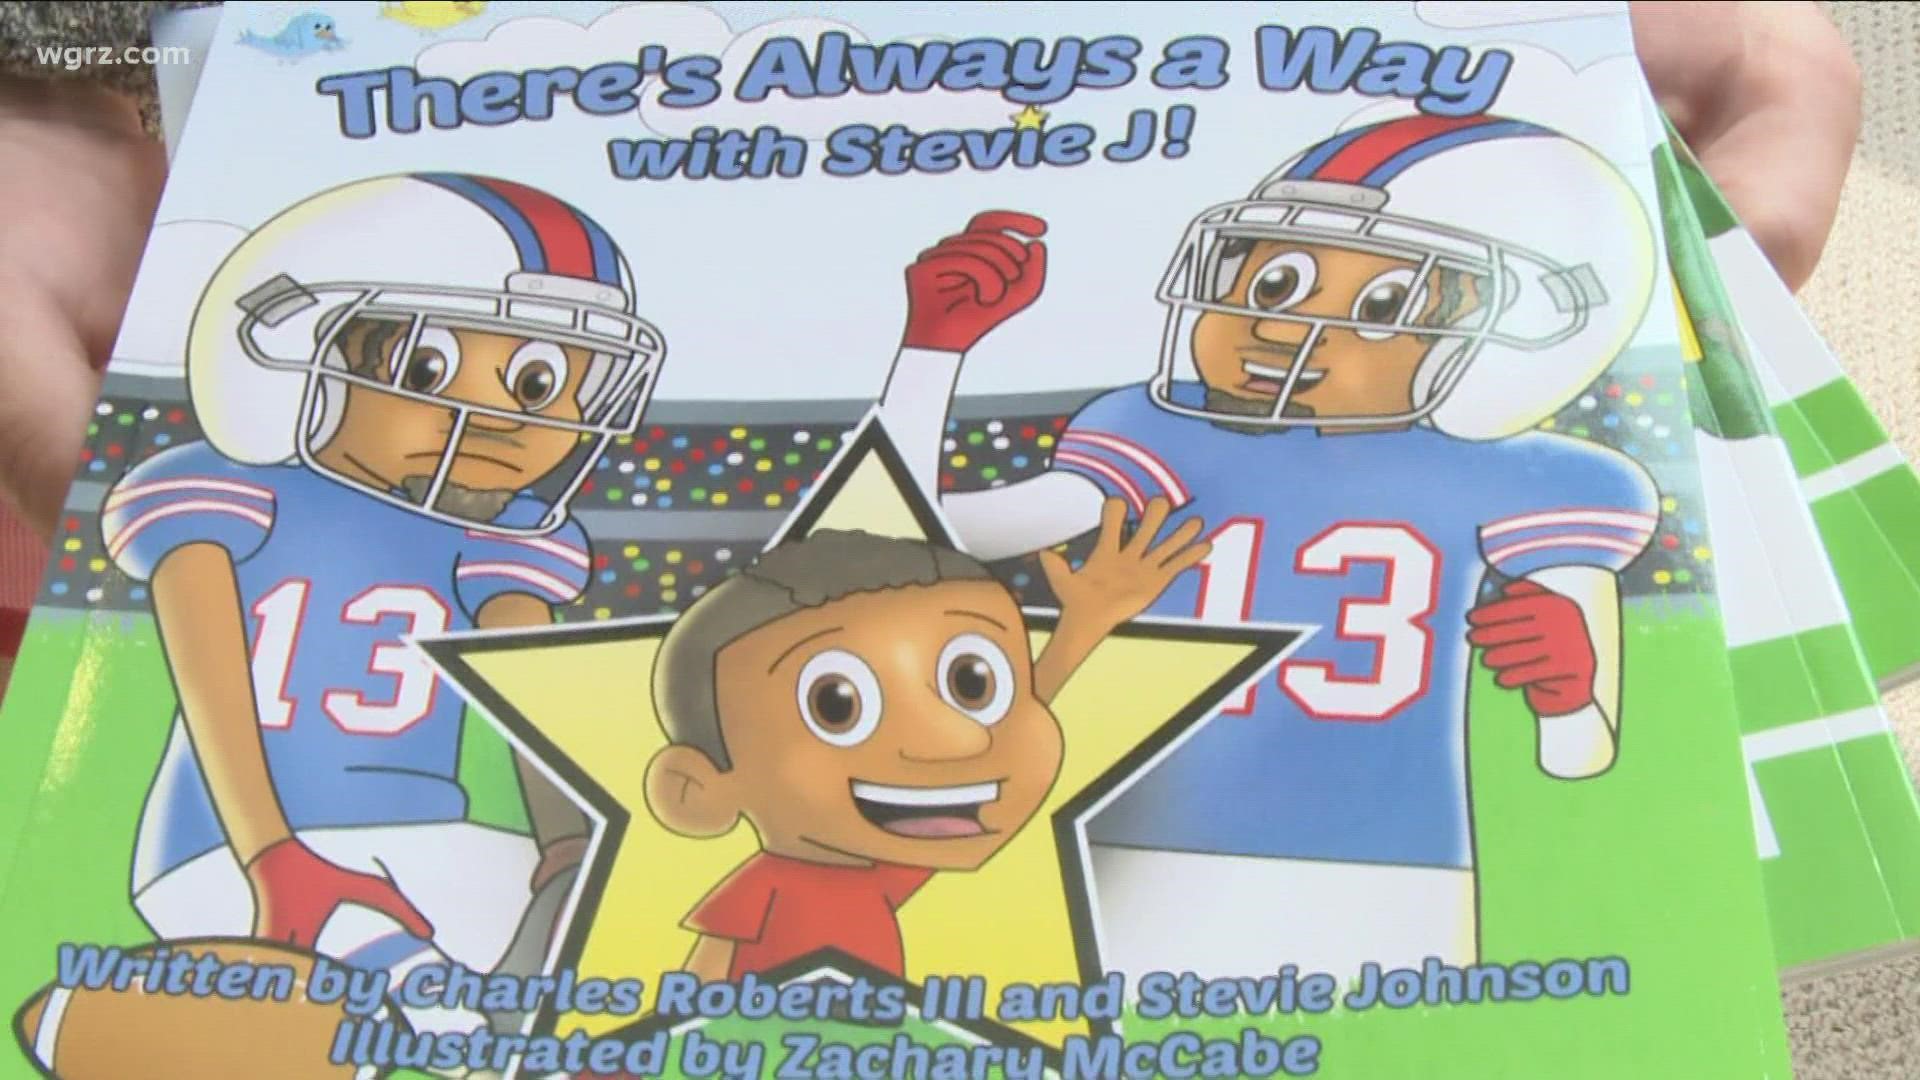 Today Stevie Johnson joined Charlie Roberts from Delaware North, to talk about the new children's book they co-authored called "There's Always a way with Stevie J."